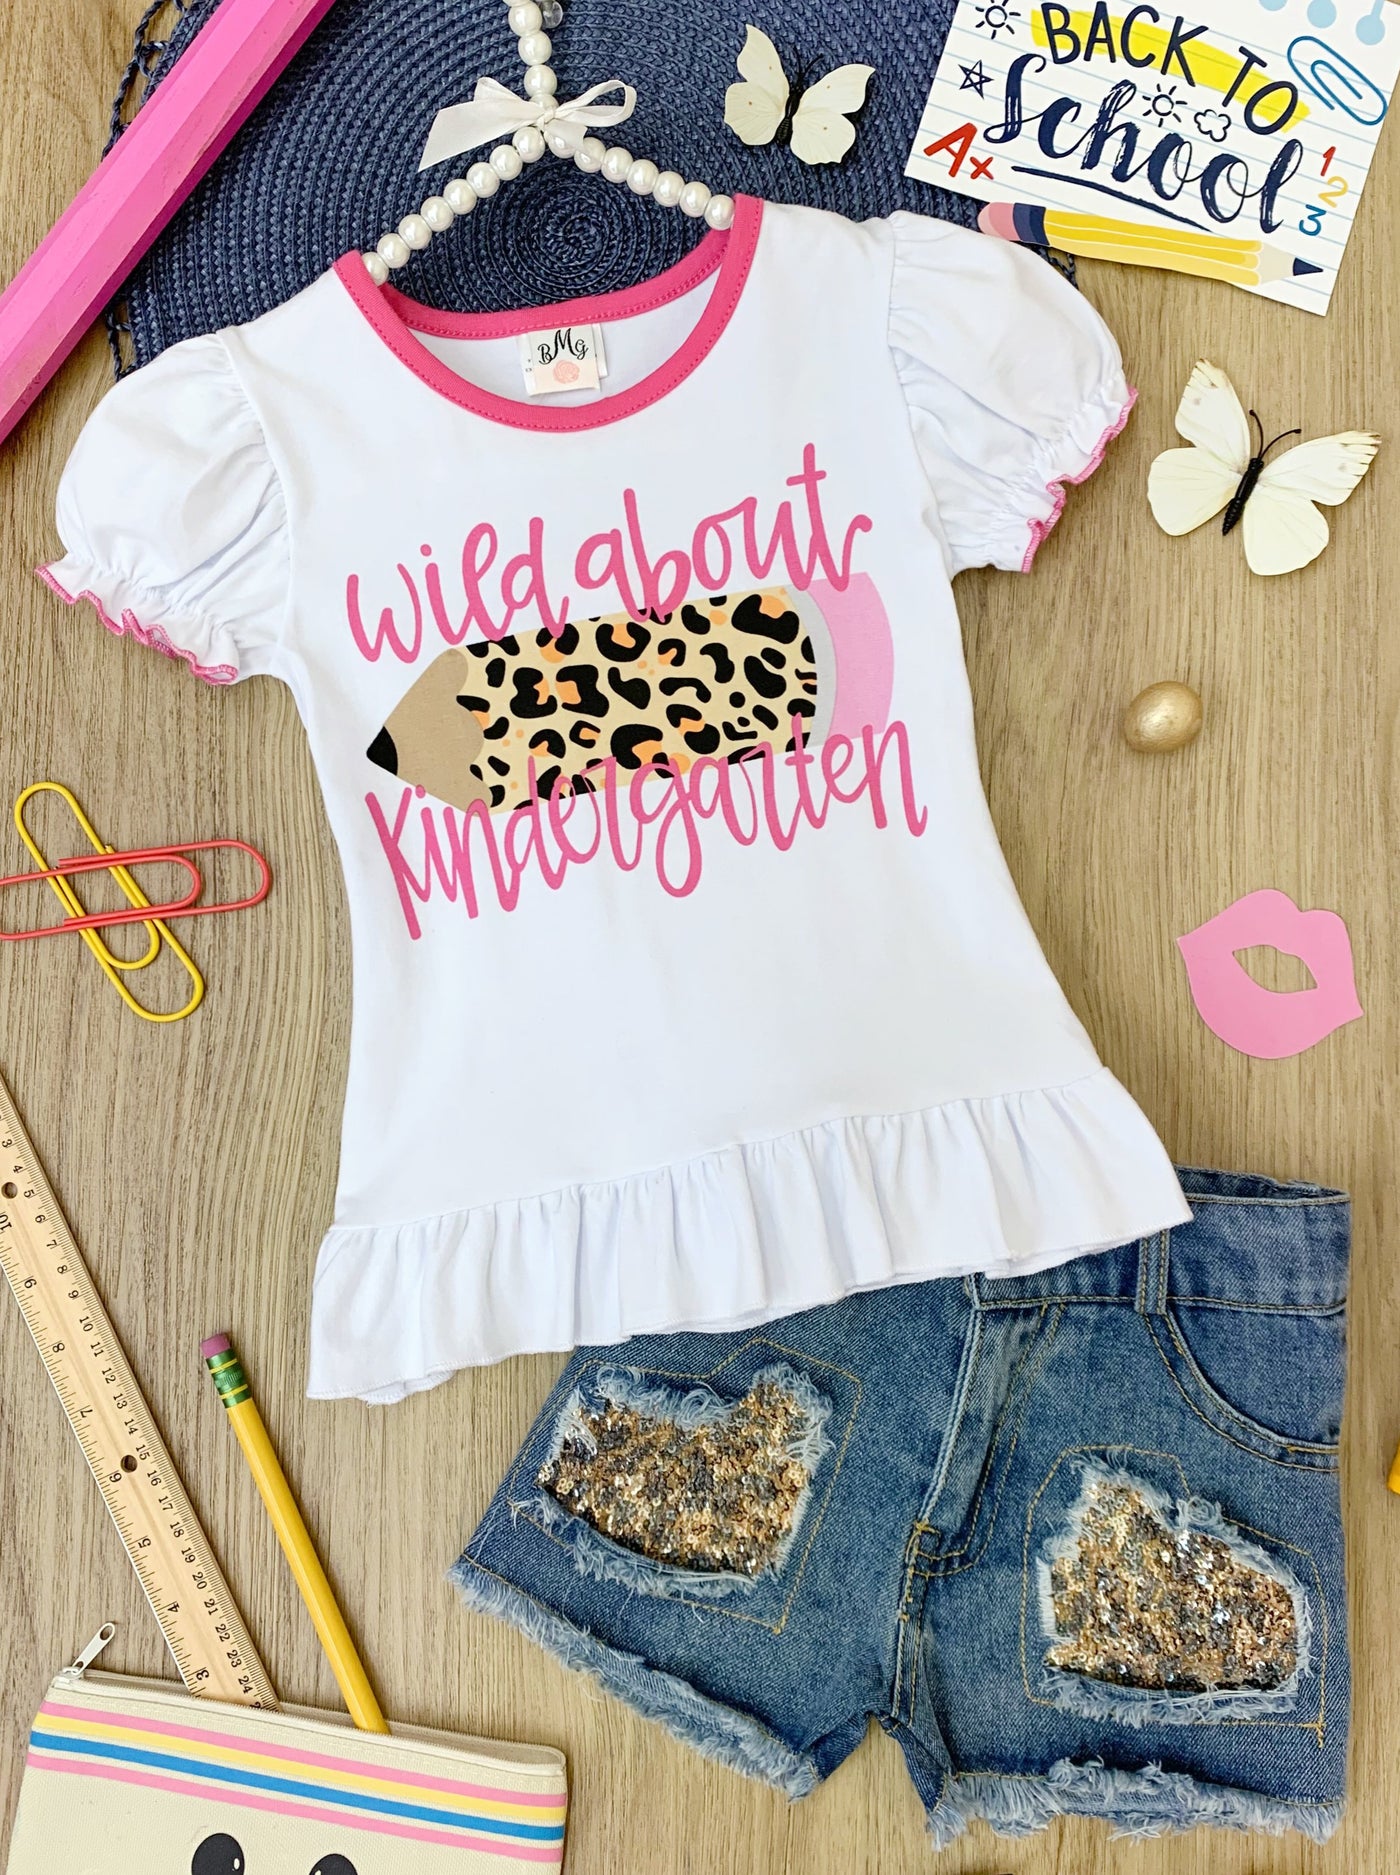 Little girls back to school "Wild About Kindergarten" ruffle top with leopard print graphic and leopard print sequin patched denim shorts - Mia Belle Girls